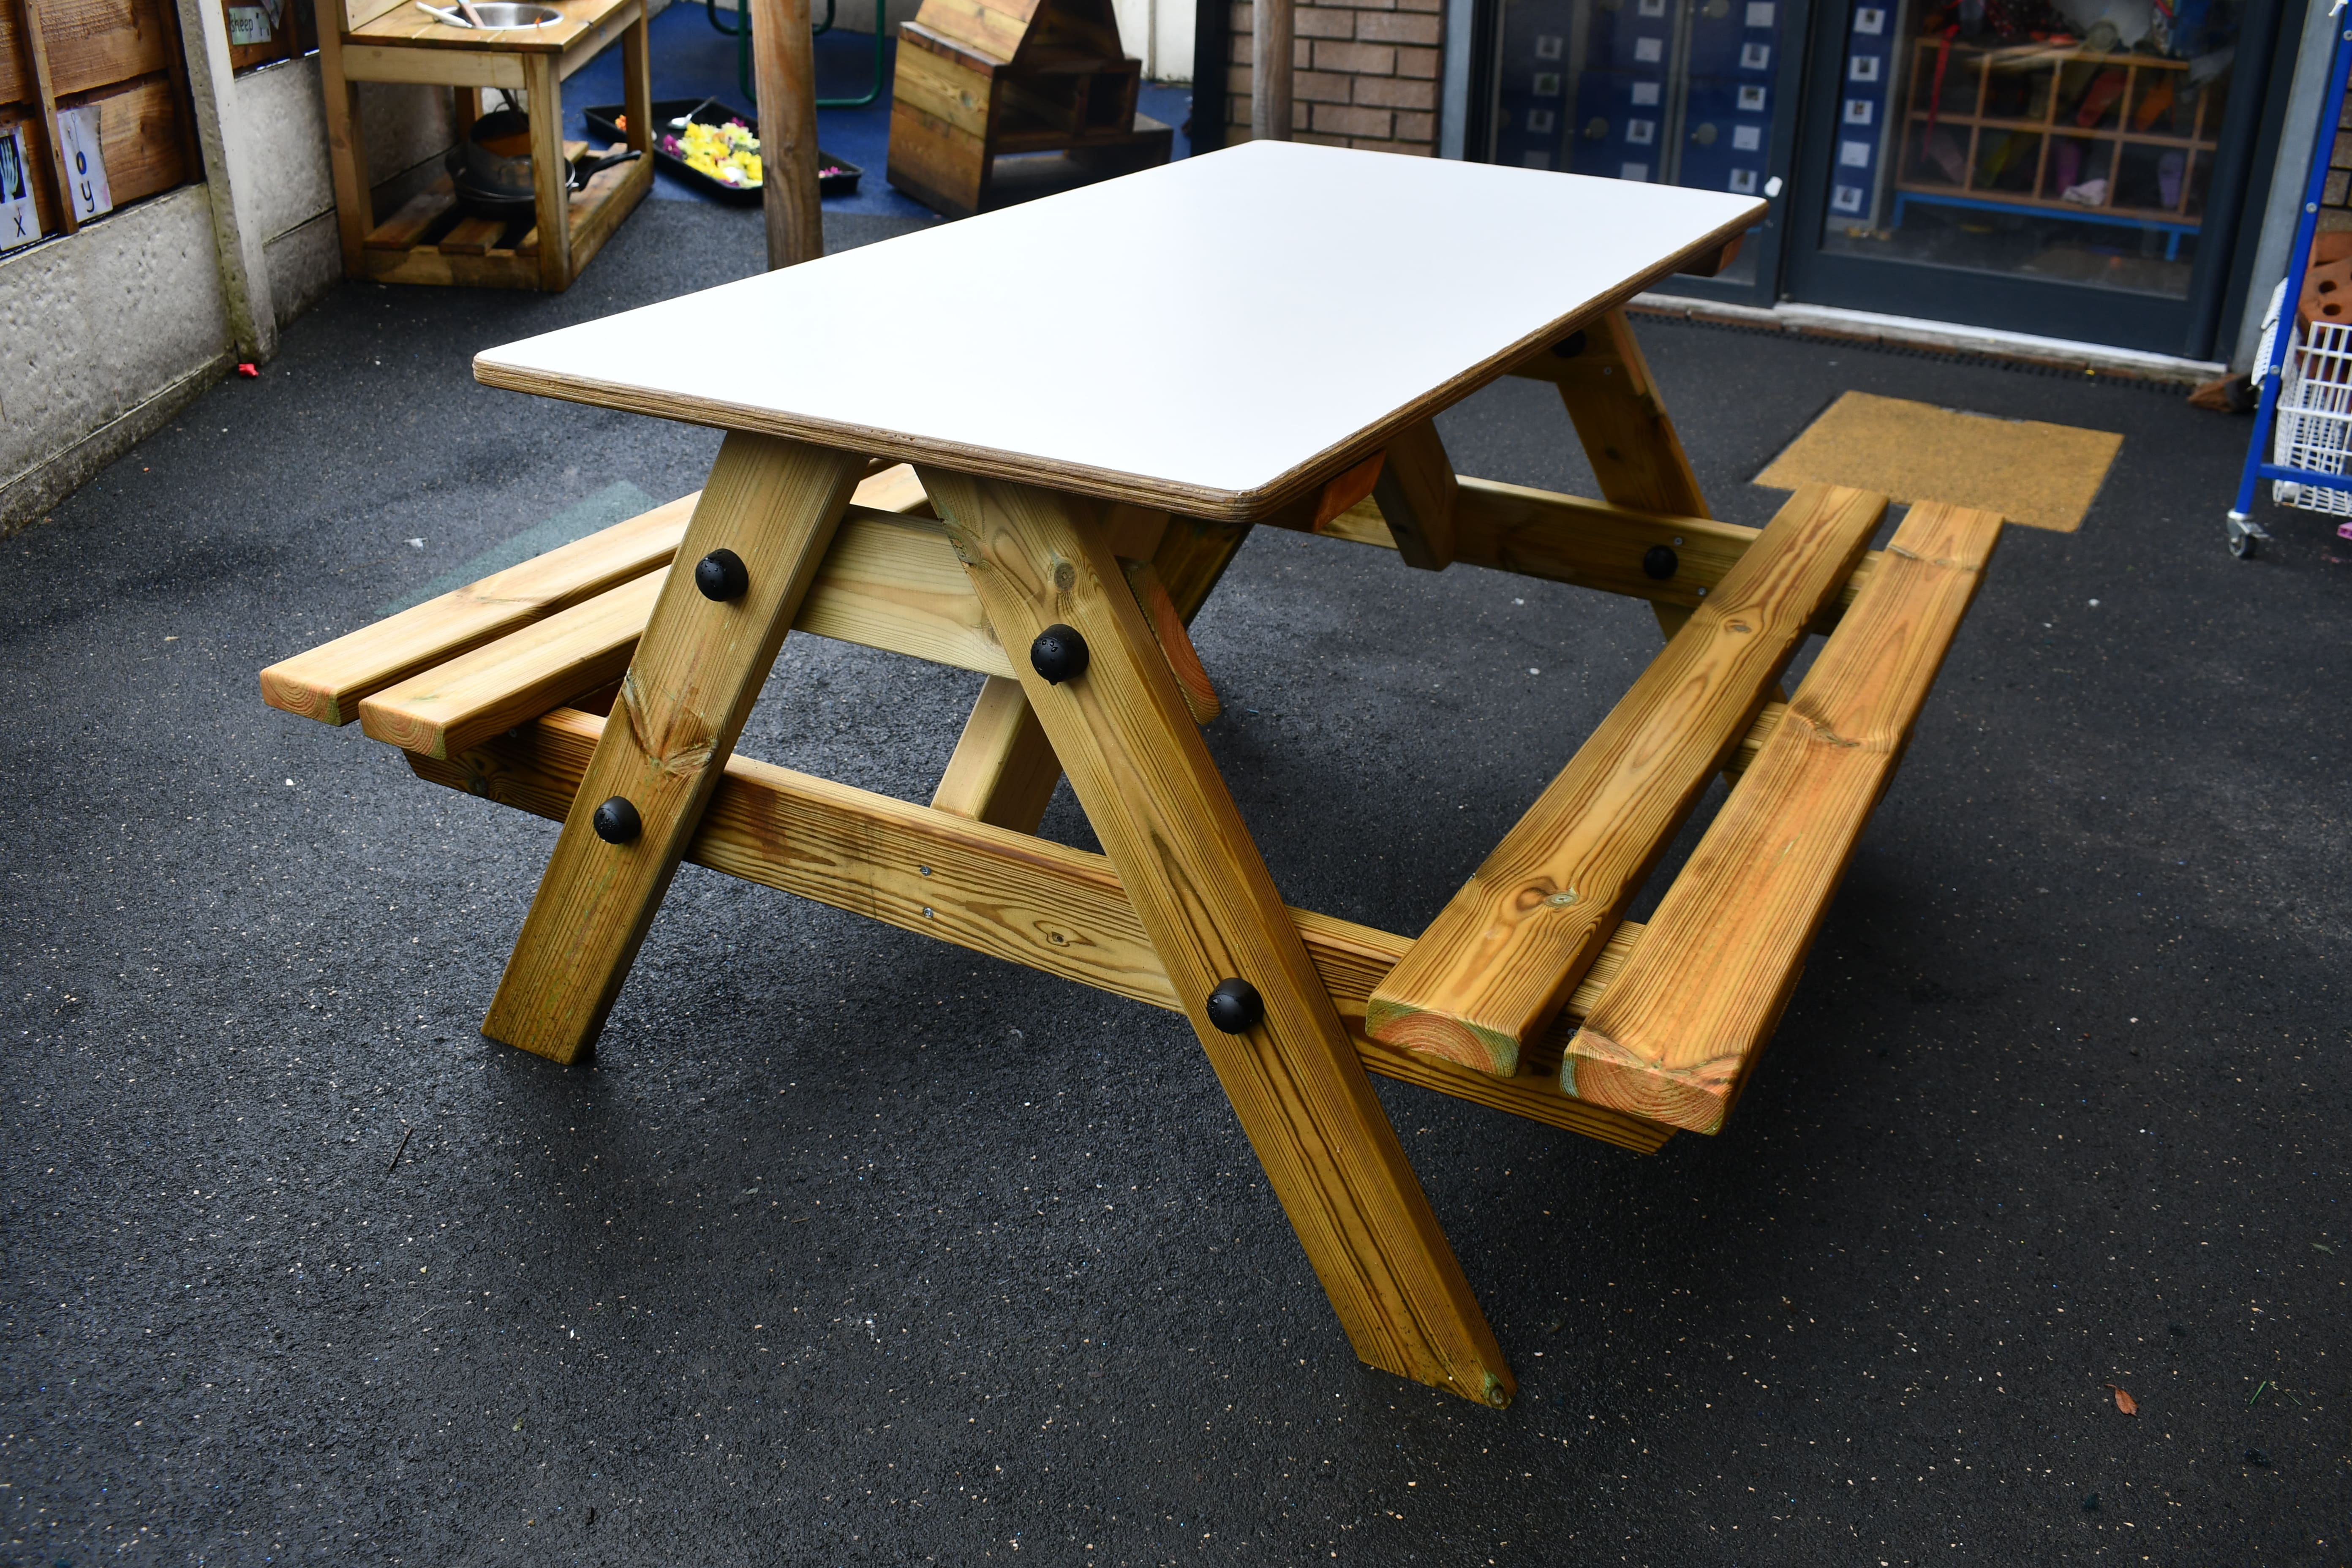 The EYFS Picnic Table. It has a white tabletop with natural wood colouring everywhere else. The Early Years Picnic Table can seat up to 4 children.